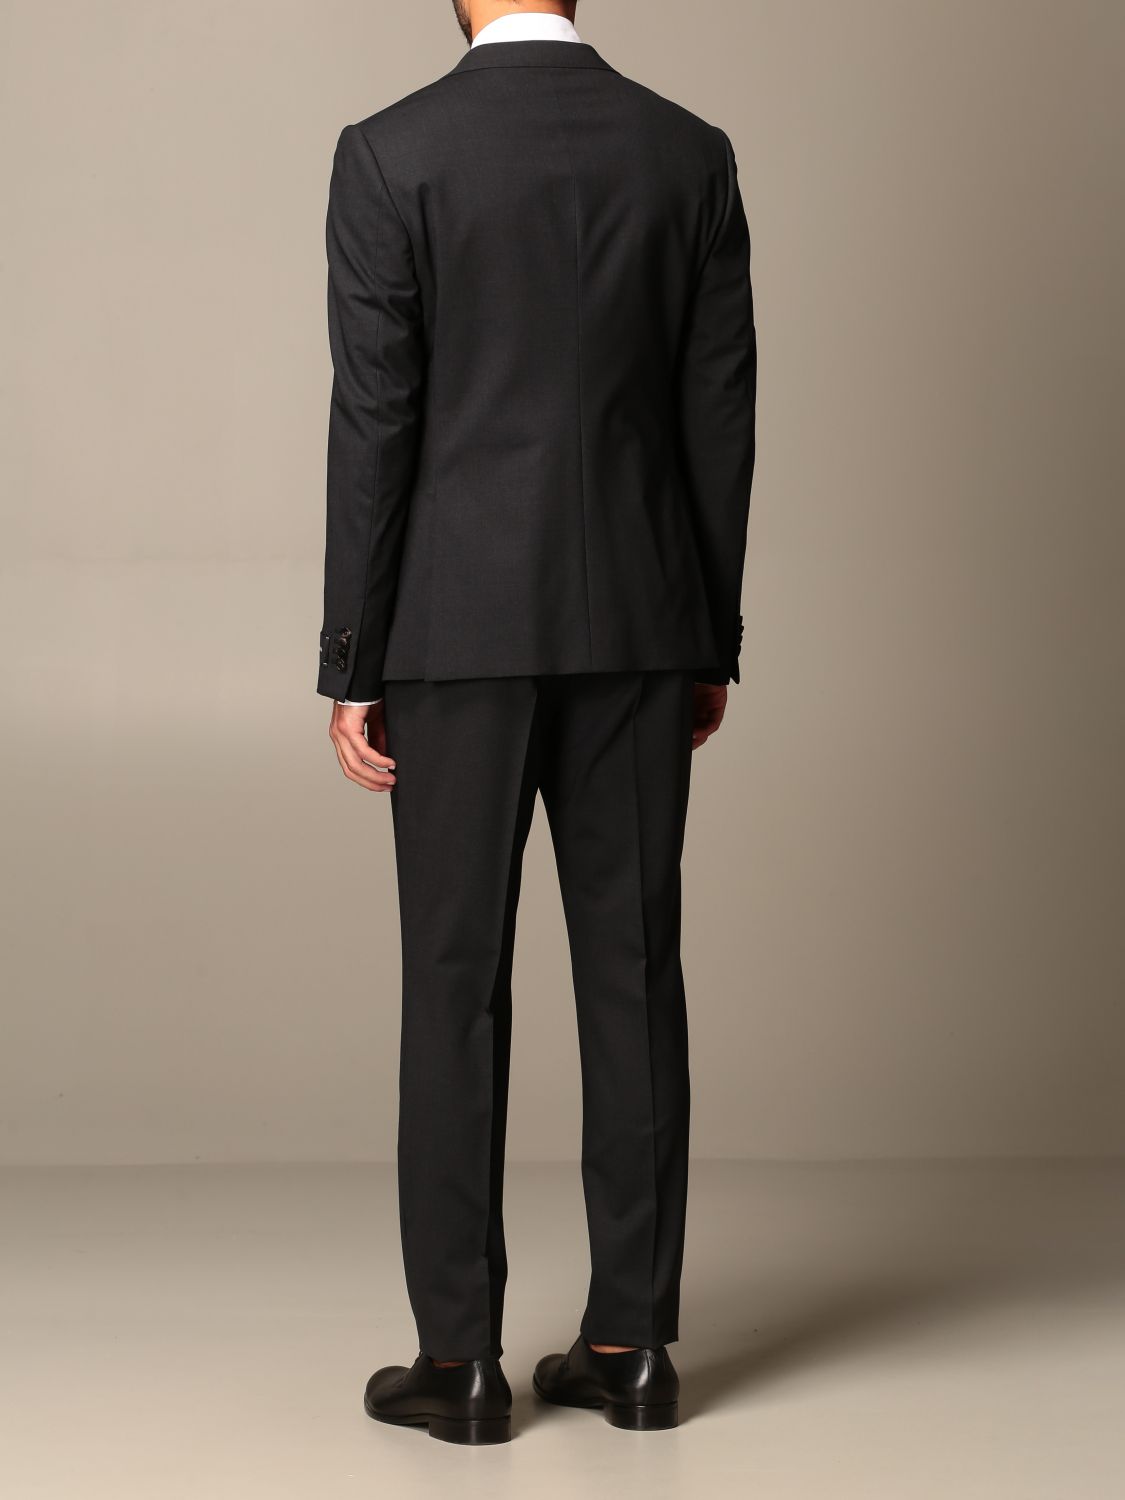 Z Zegna Outlet: single-breasted suit in 290 gr wool drop 8 - Charcoal ...